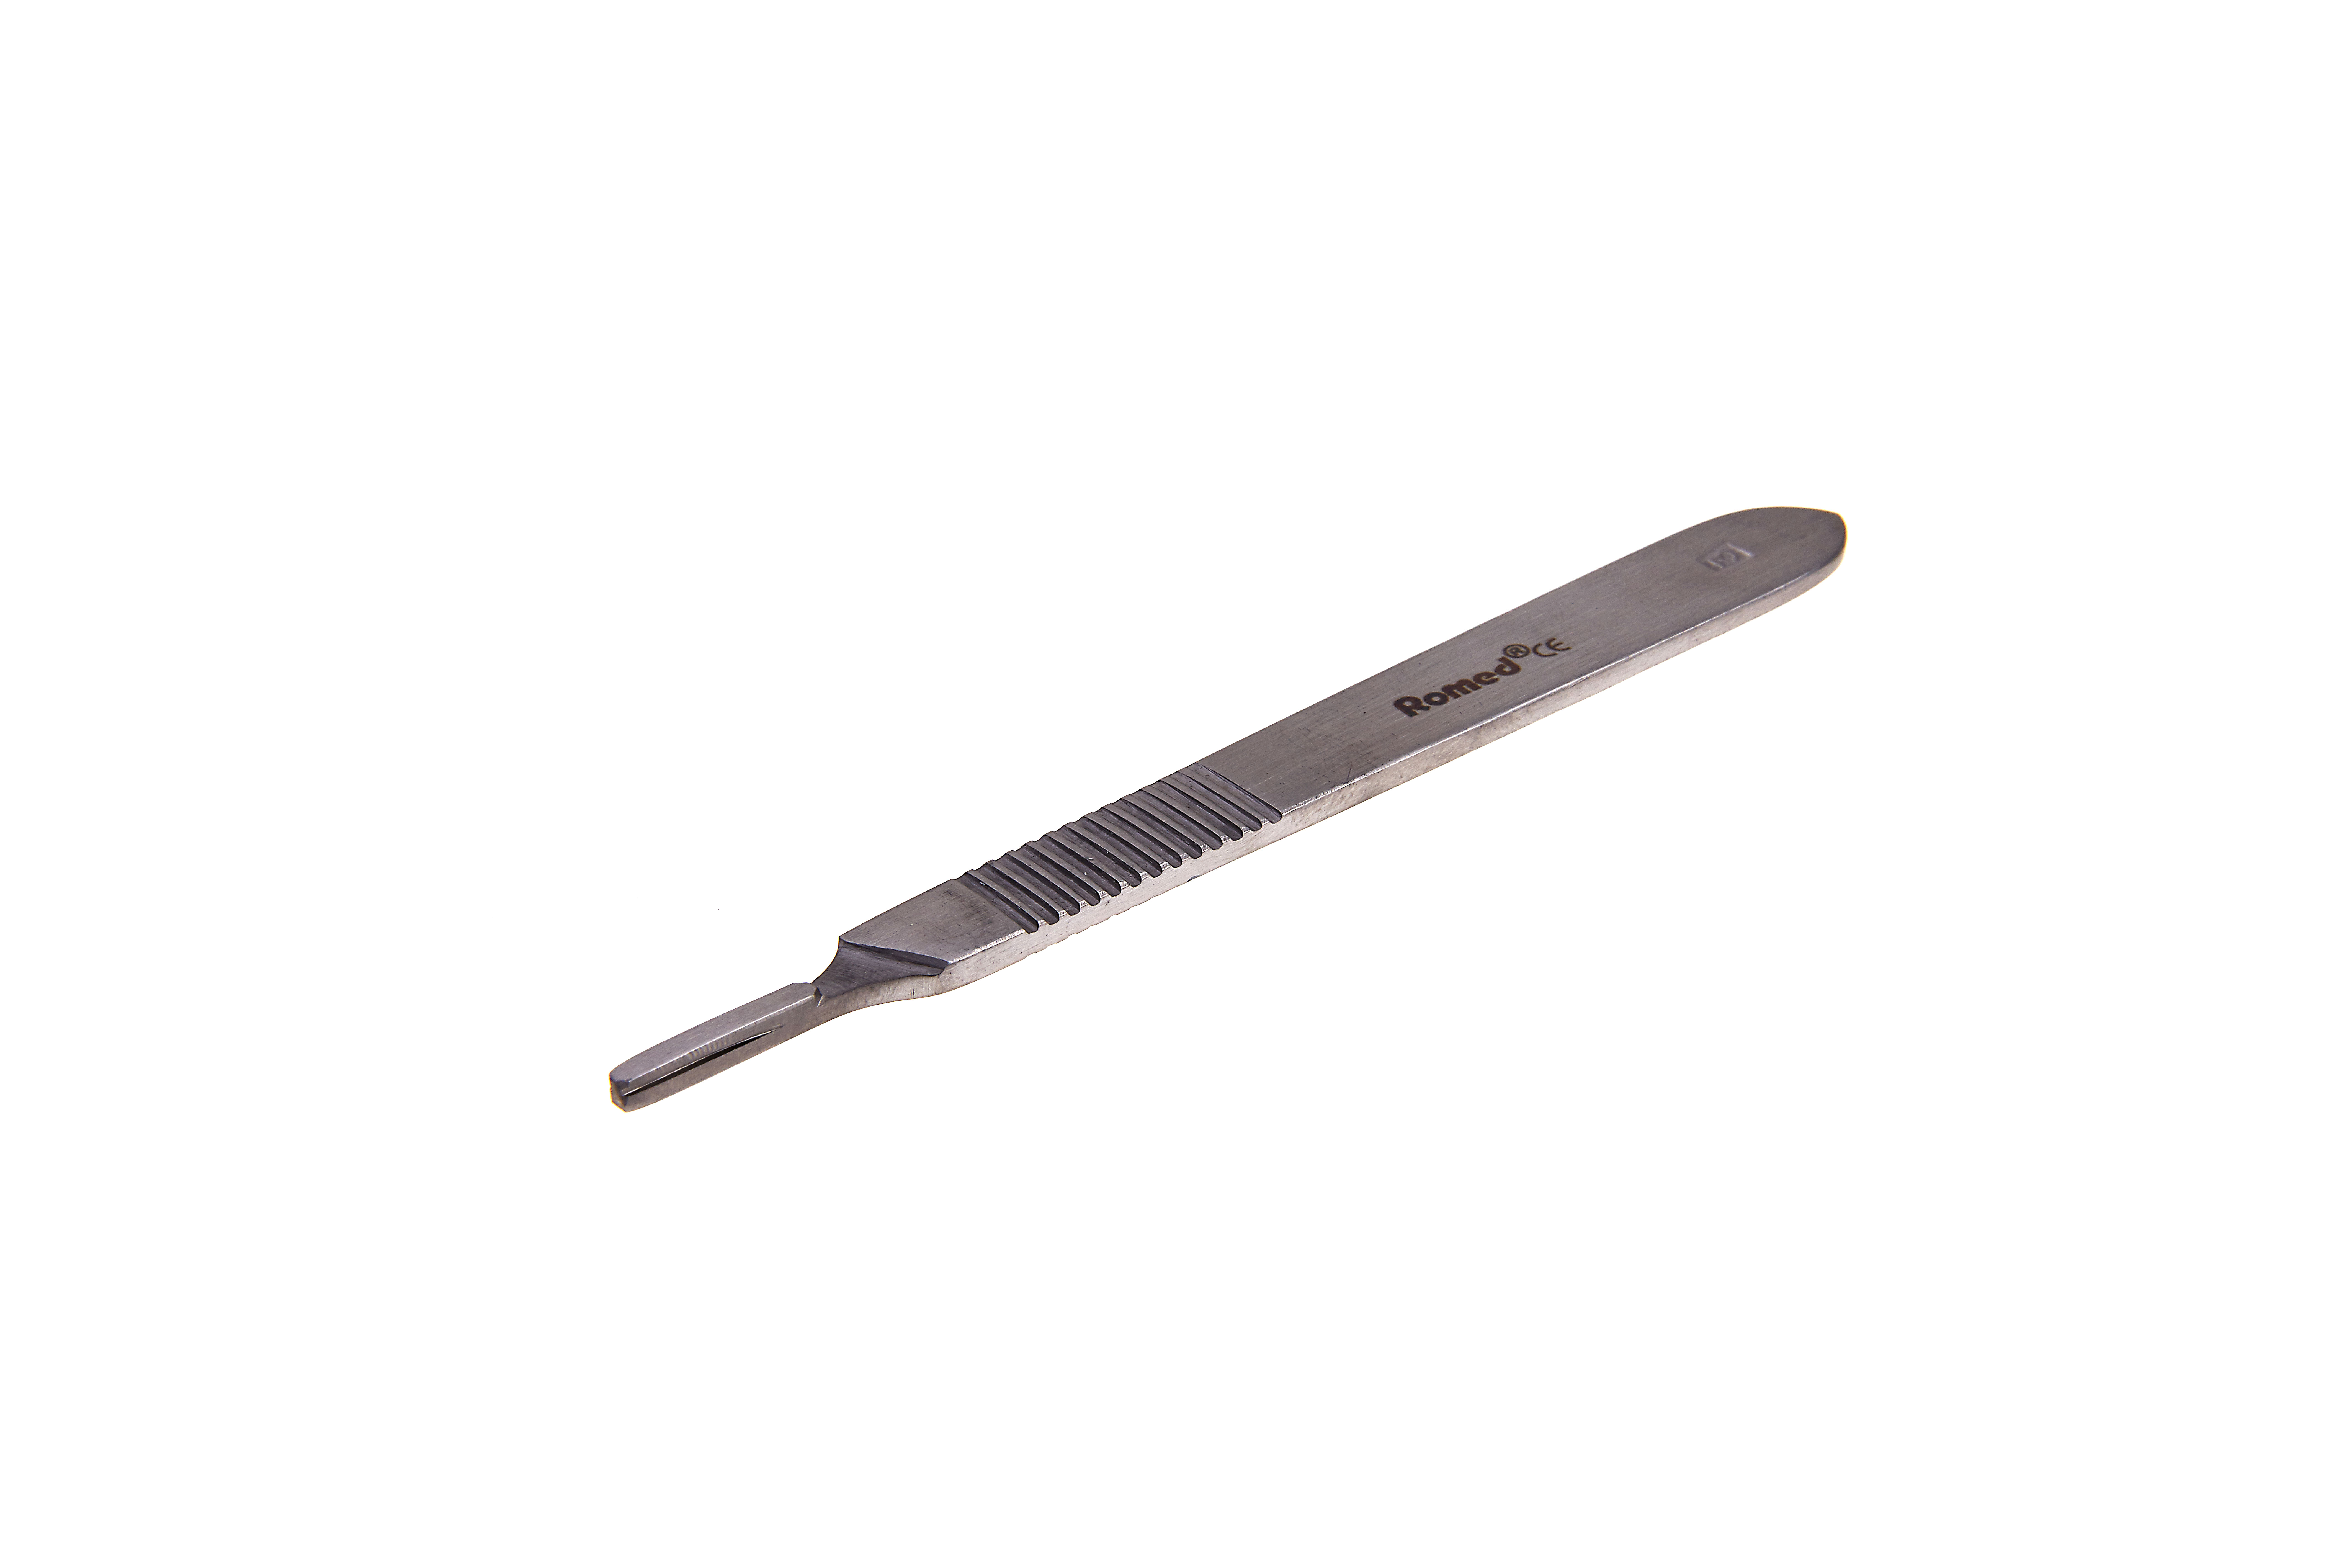 HANDLE-3 Romed handles for scalpel blades, non sterile, no. 3: fig. 10/11/12/15/18, 50 pcs in a carton.